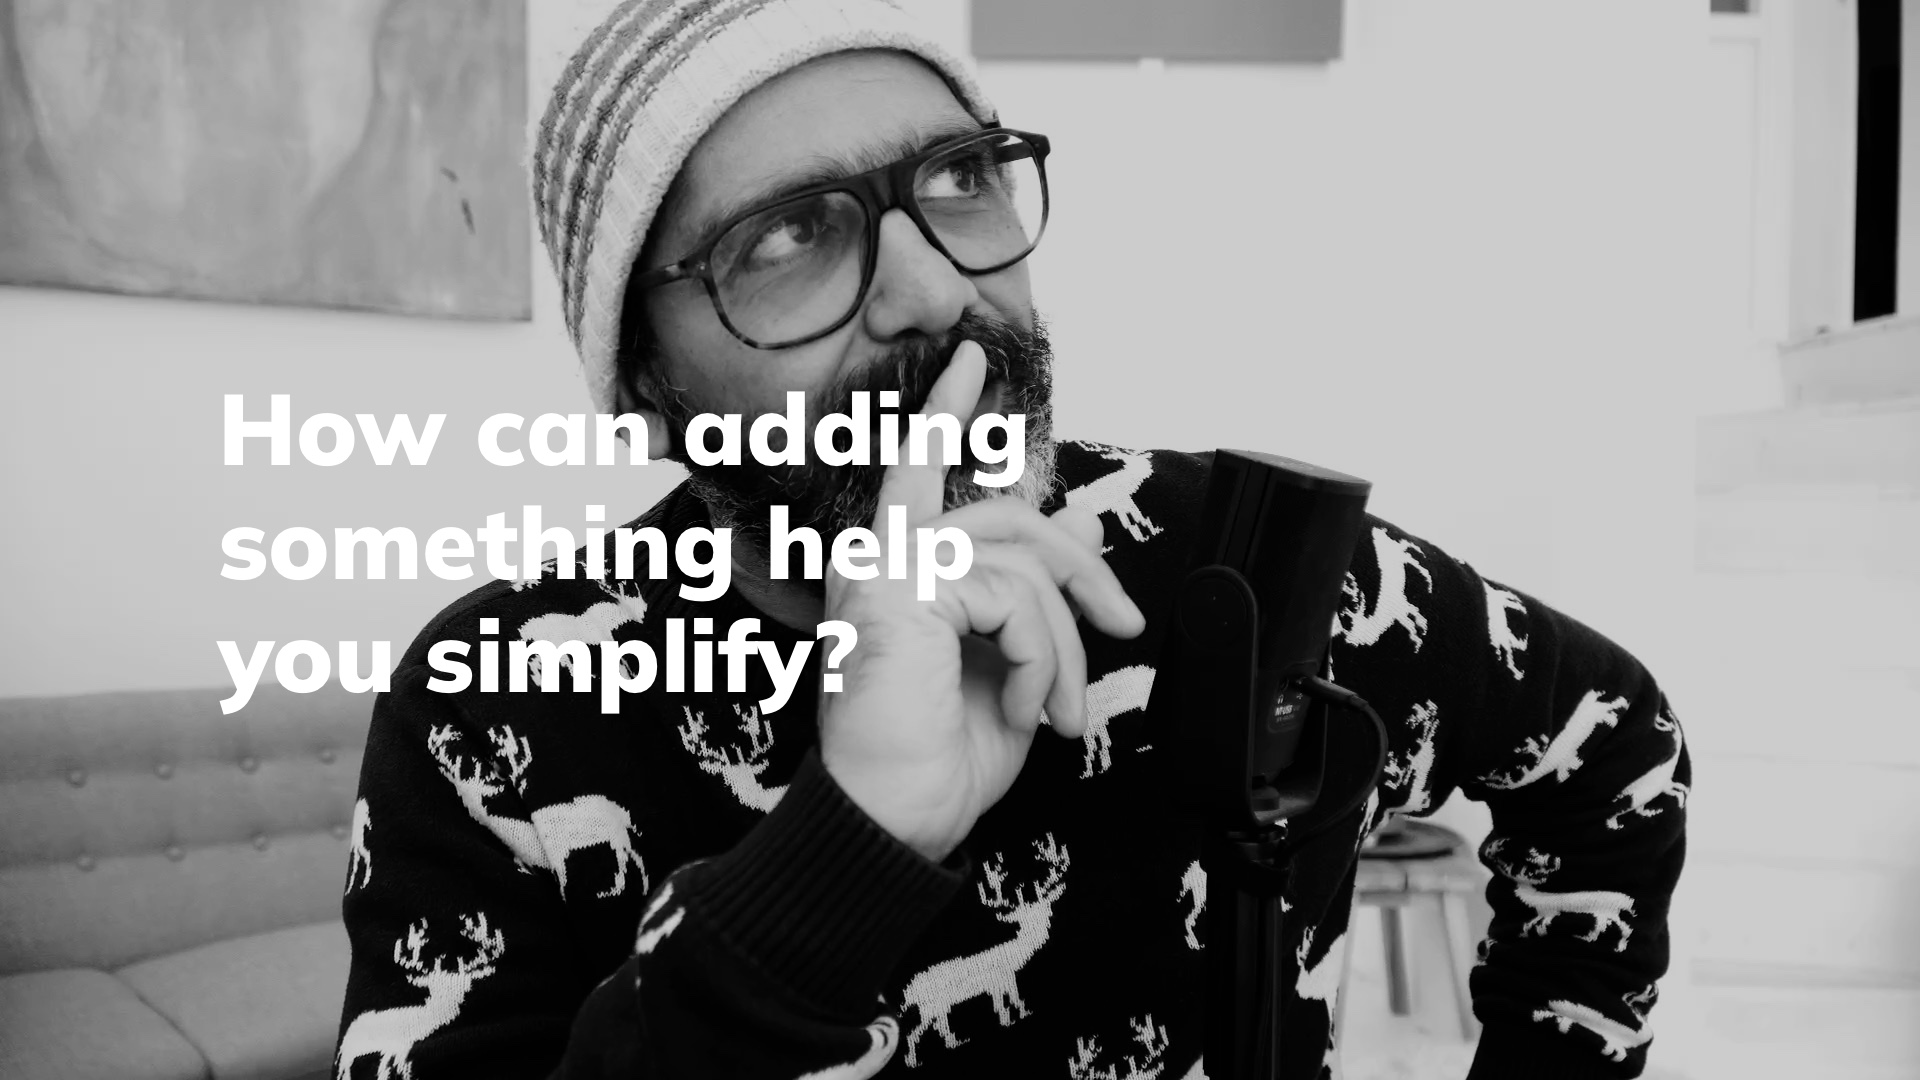 How can adding something help you simplify?